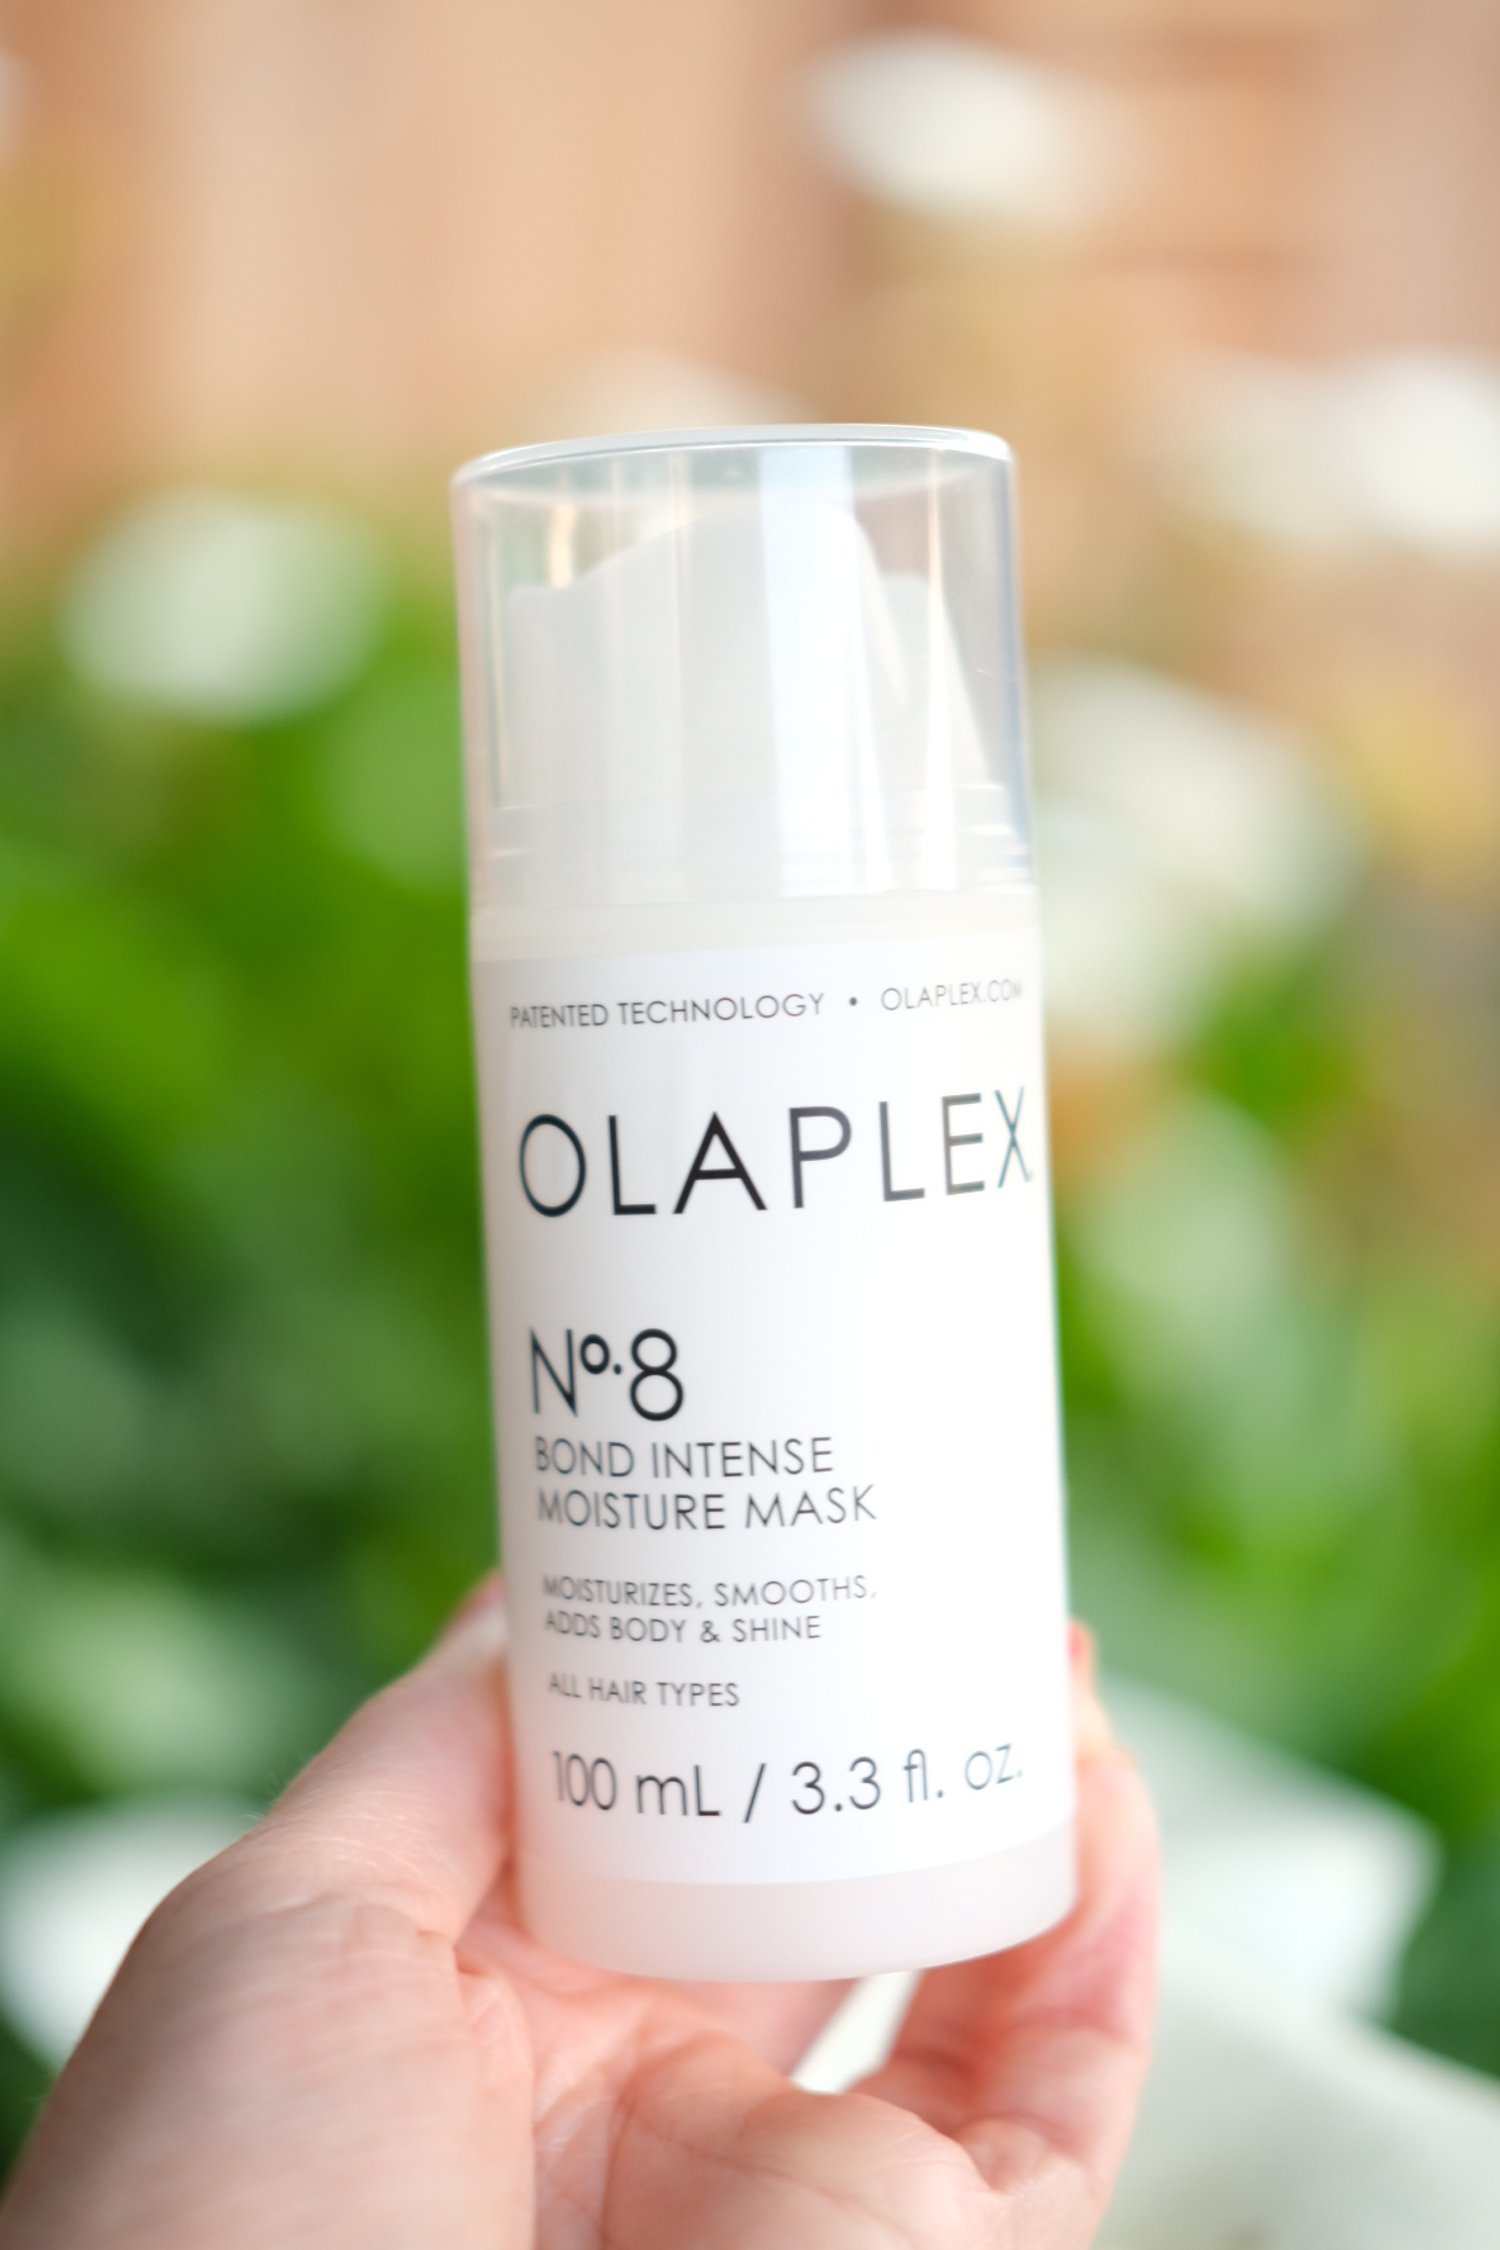 I will talk through the difference between Olaplex 6 and 8 to help you decide whether Olaplex 6 or 8 is for you. After reading this, you will know exactly which Olaplex to use!